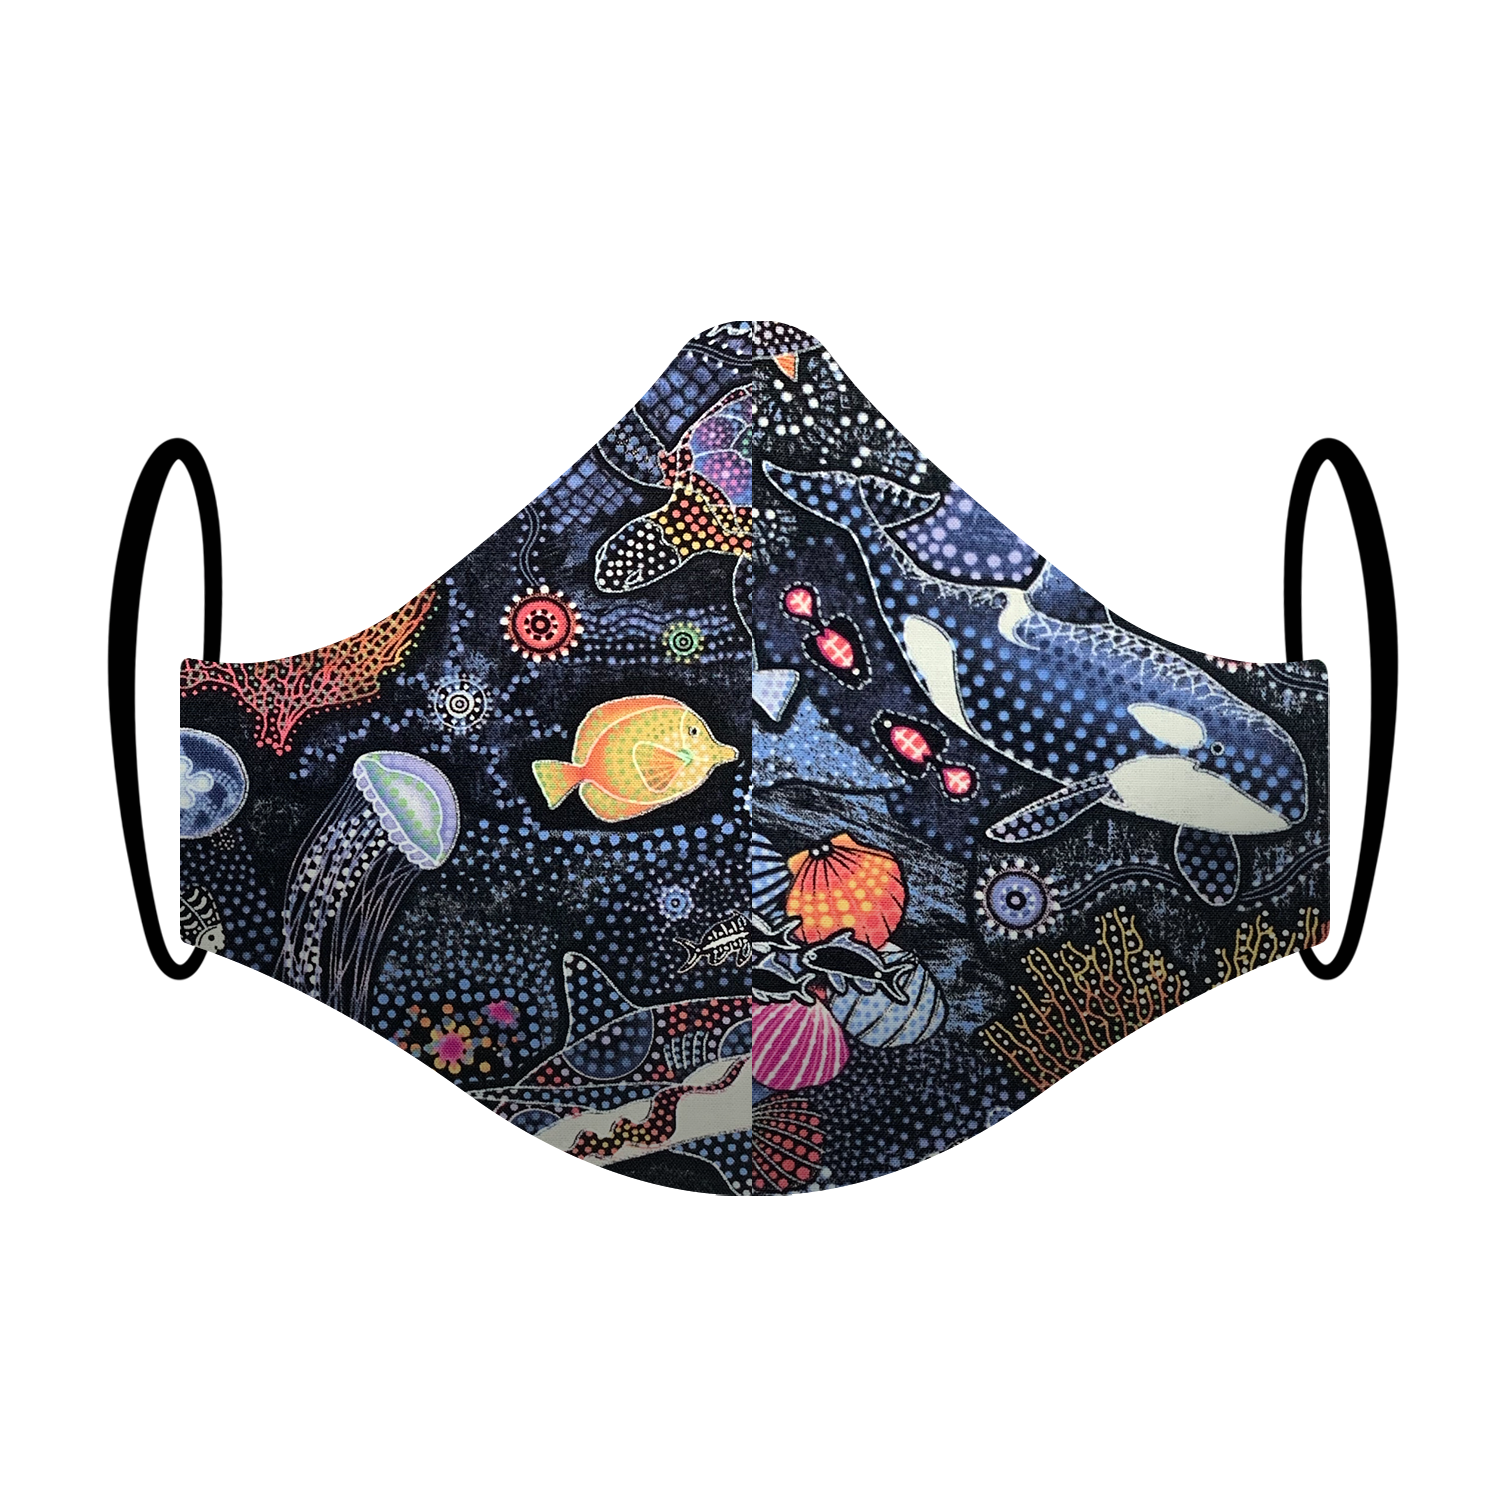 Triple layered face mask made in Melbourne Australia from cotton and poplin featuring a unique ocean reef whale shark dolphin coral fish jellyfish print